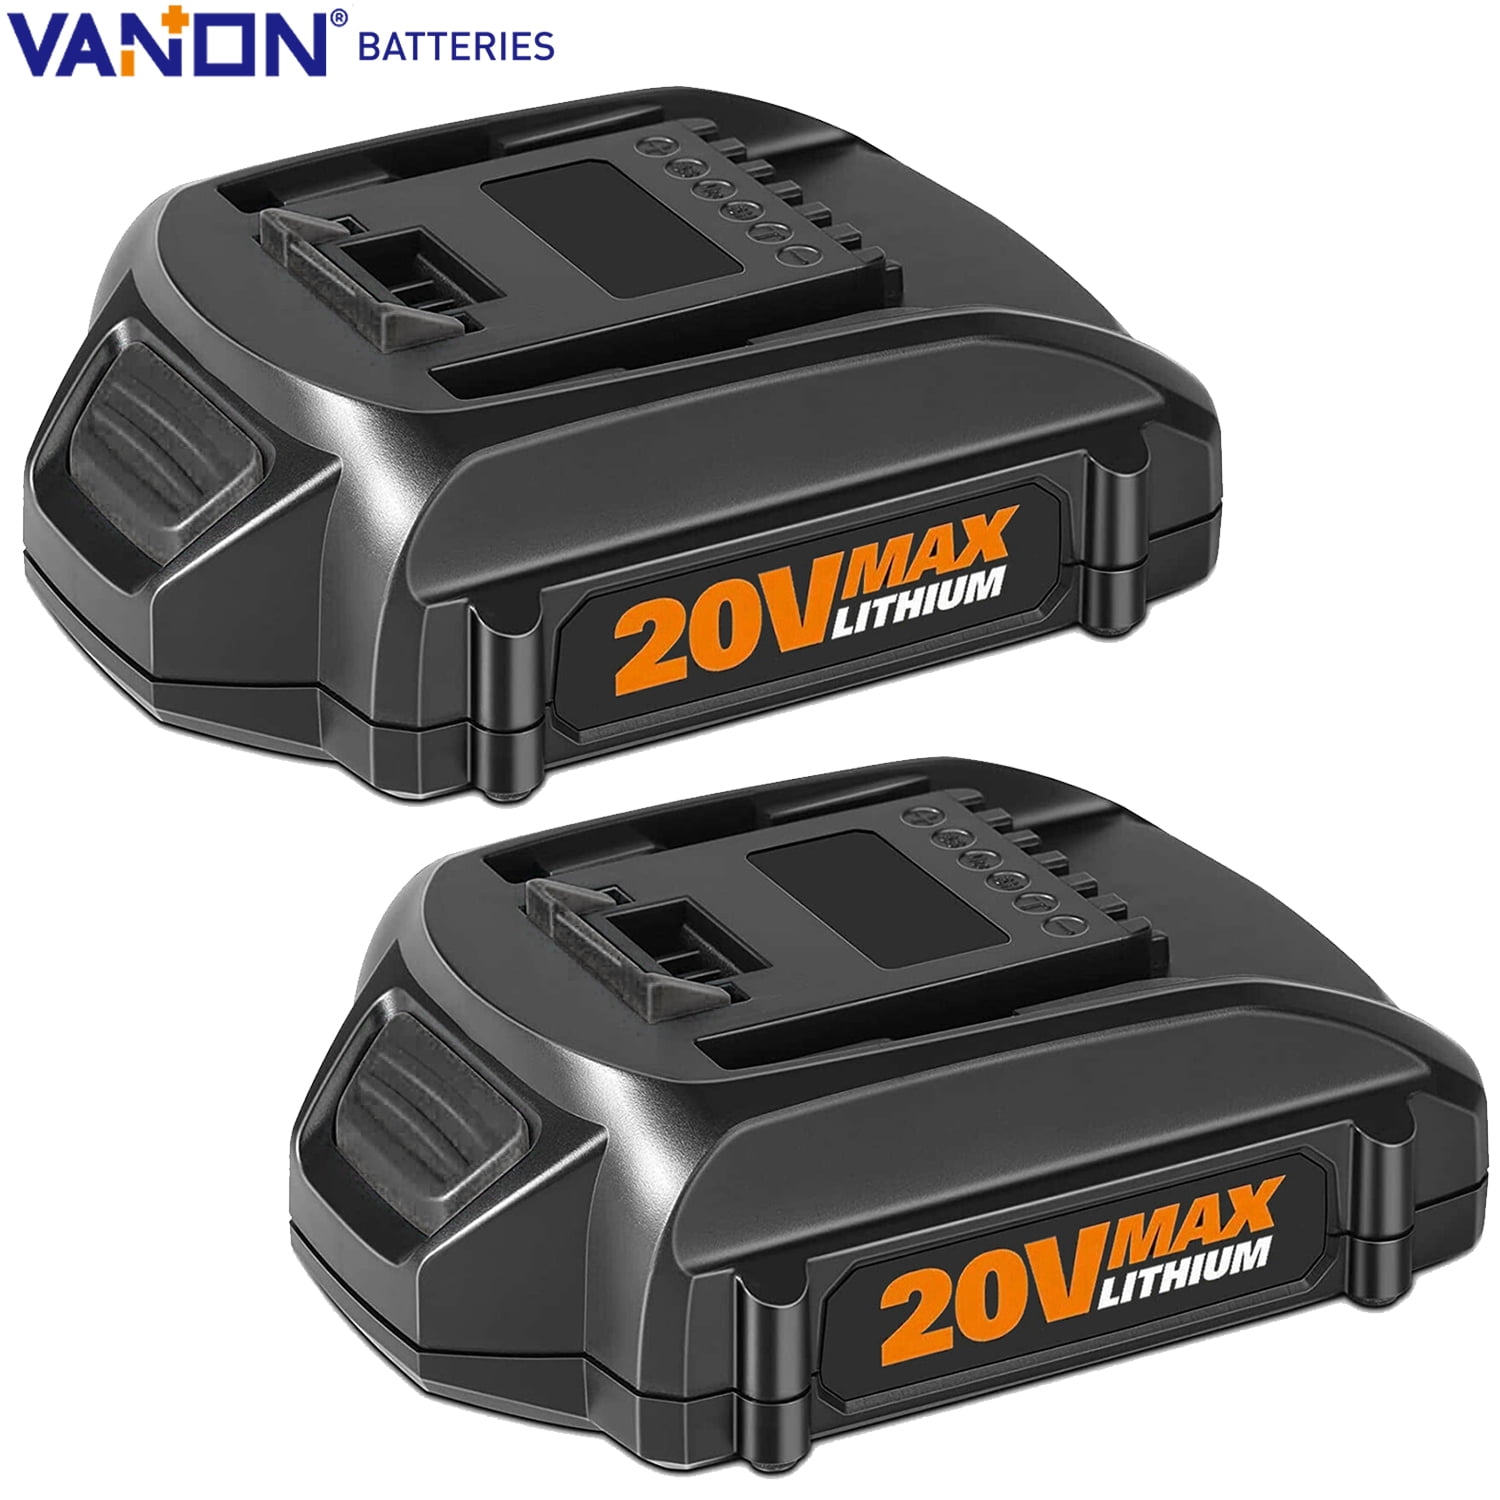 Replacement for Worx 20V 2.0Ah Powertool Battery WA3525 3 Pack 